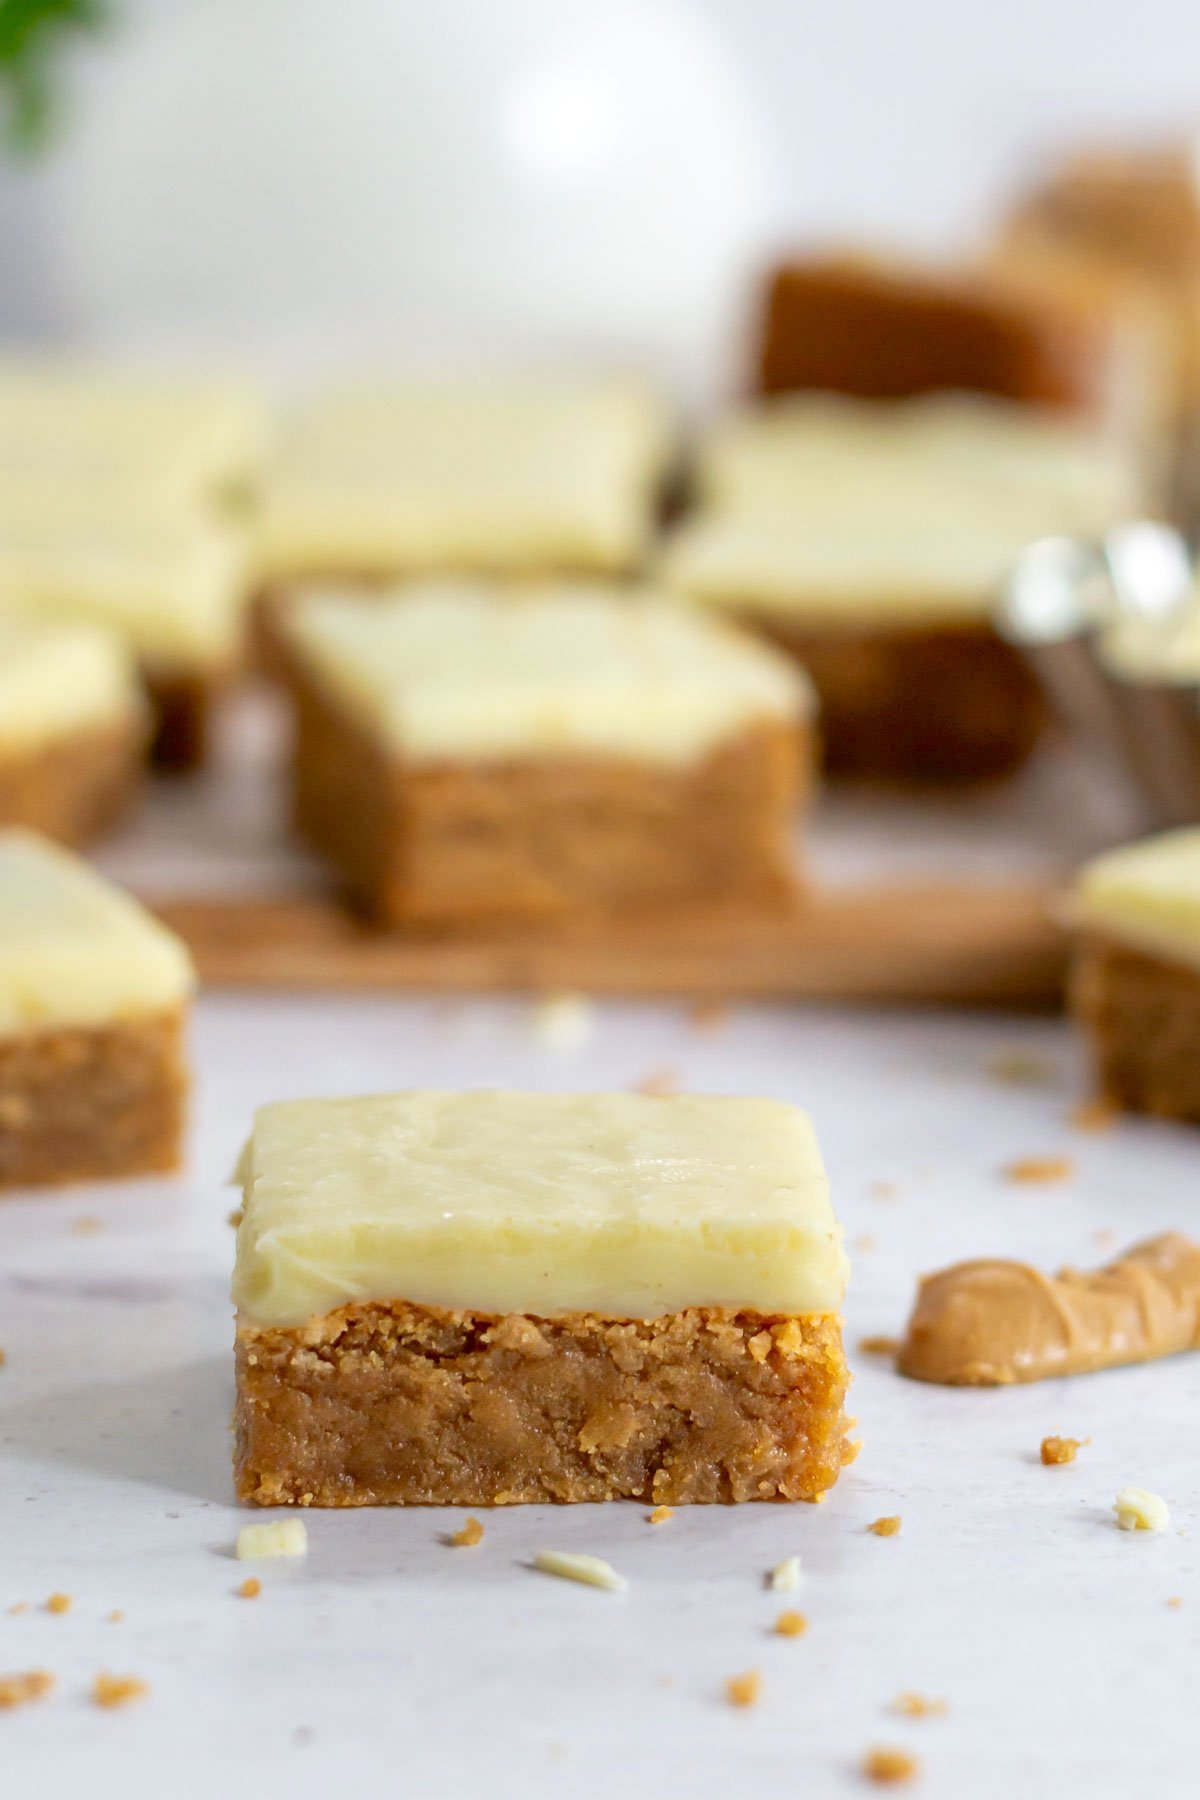 peanut butter blondie sitting on a counter with a knife full of peanut butter